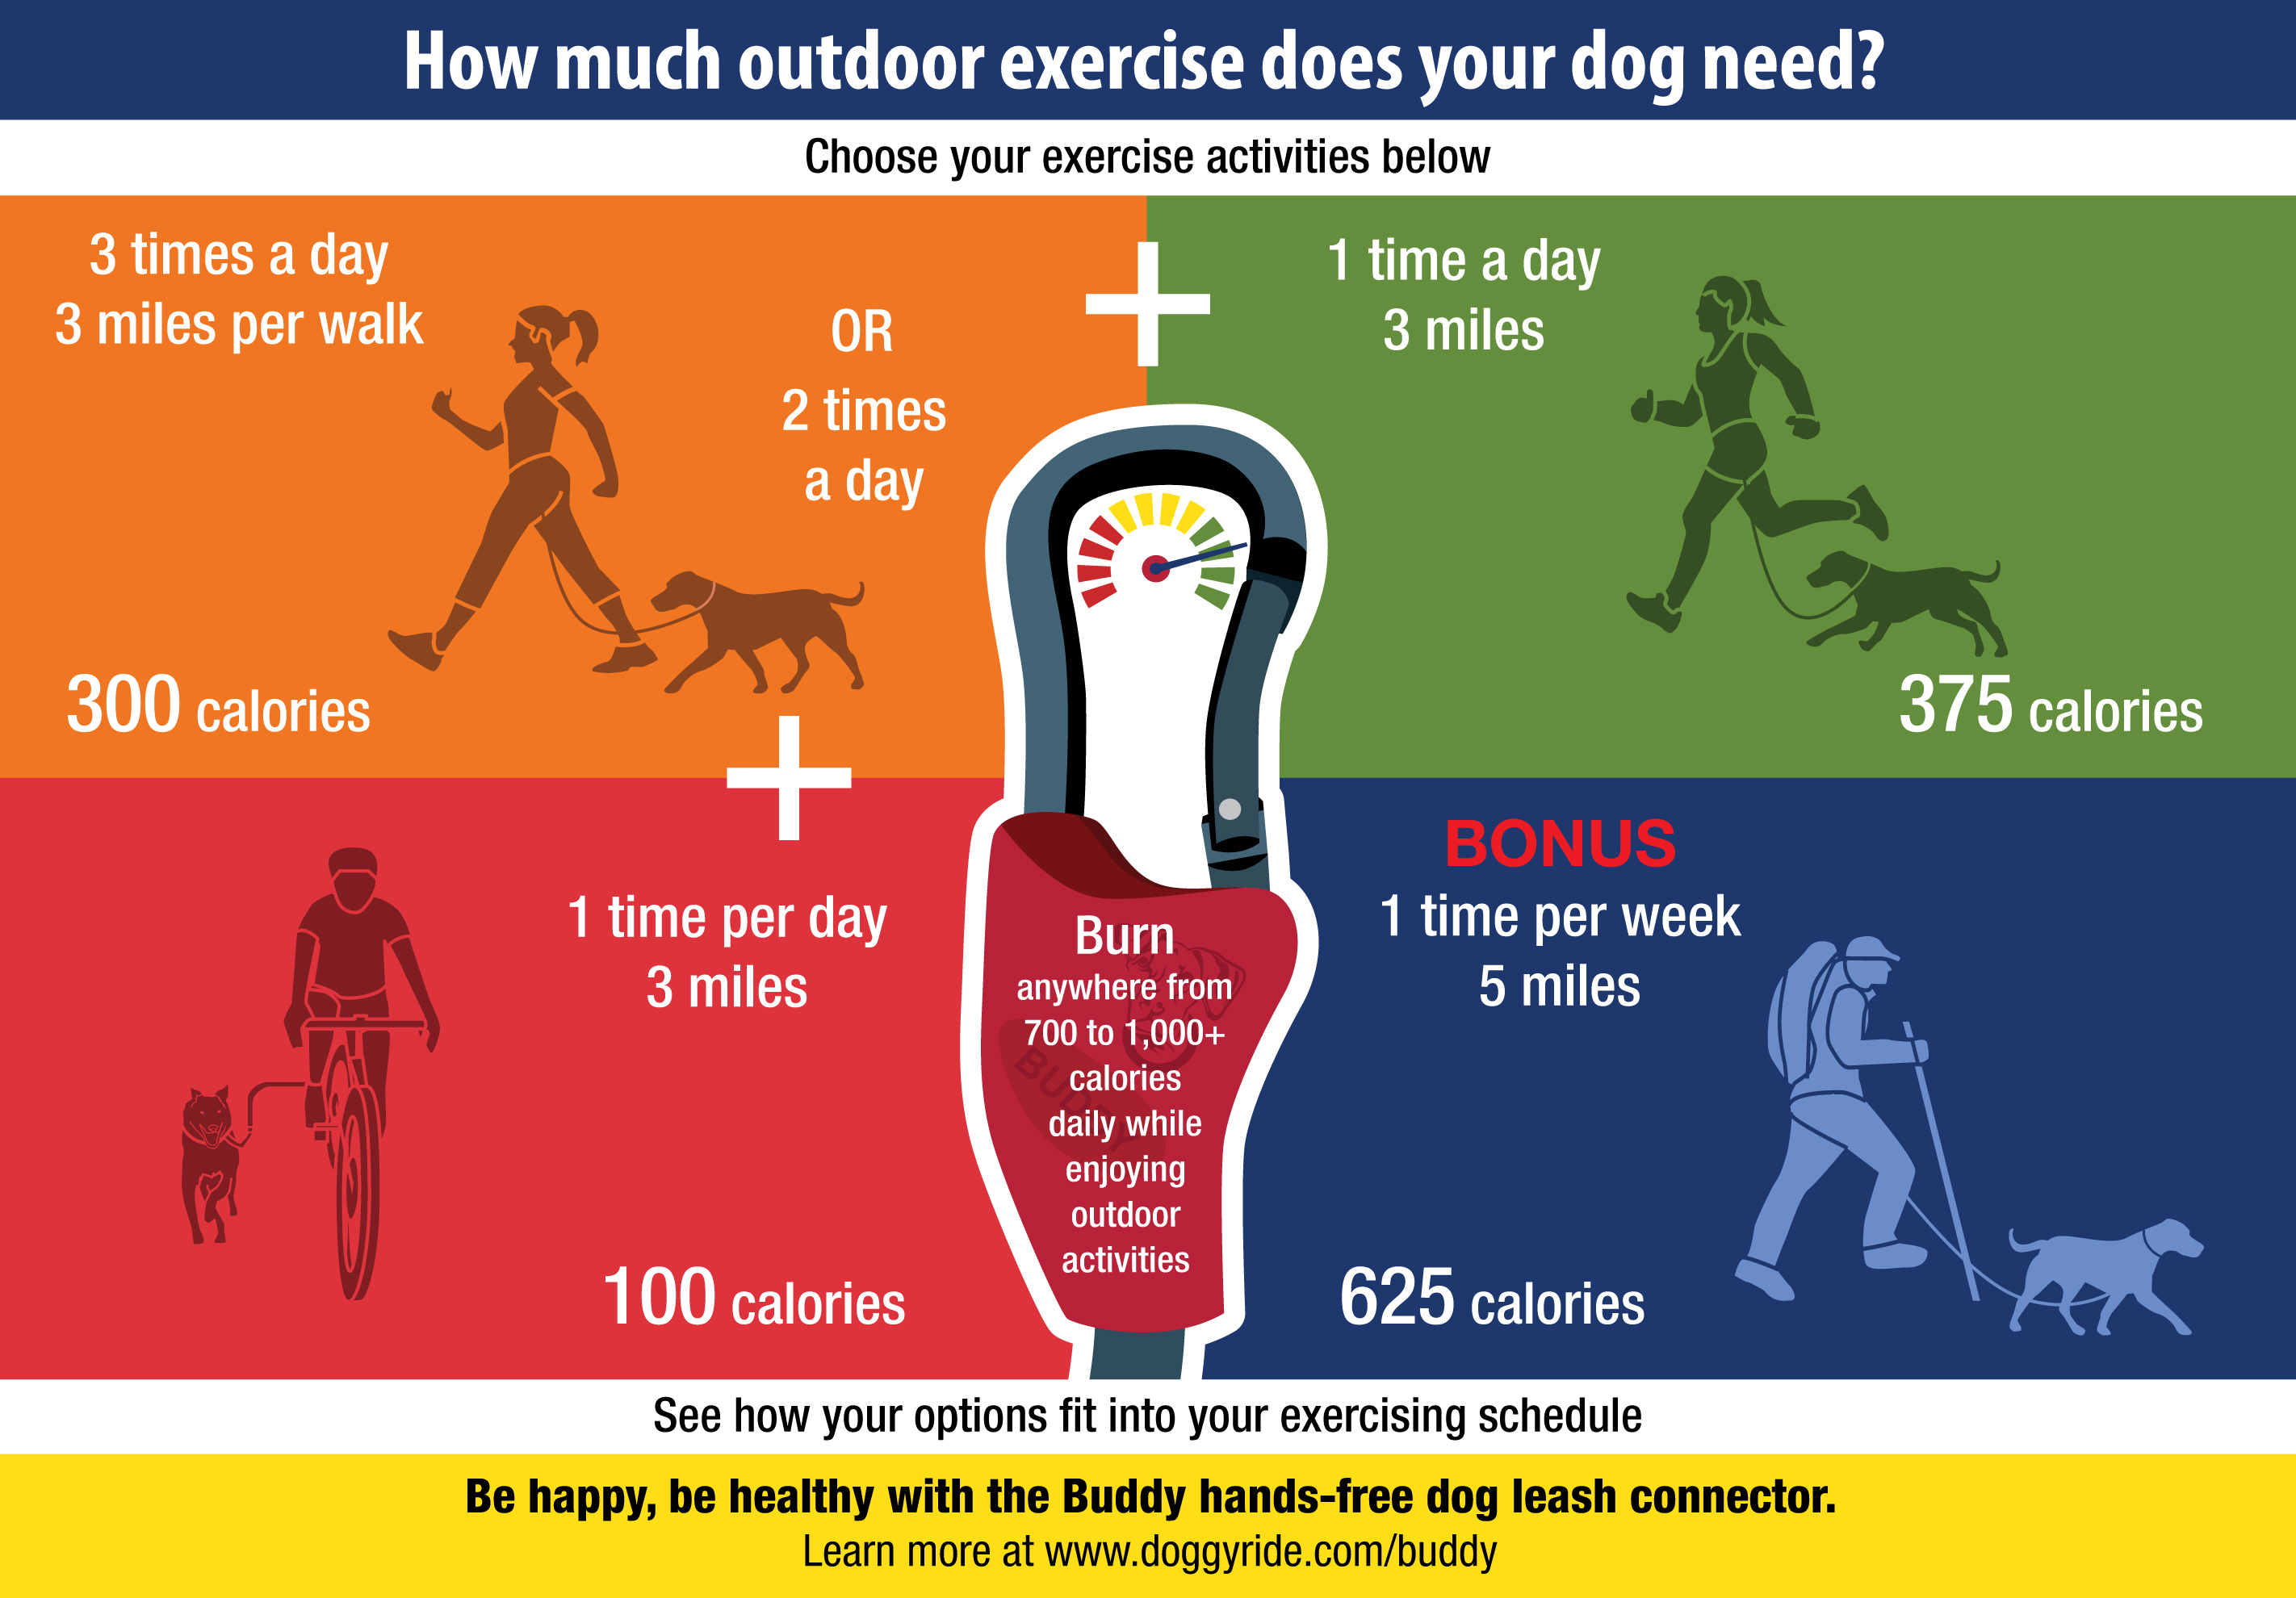 how many calories will a dog burn ealking 1 mile